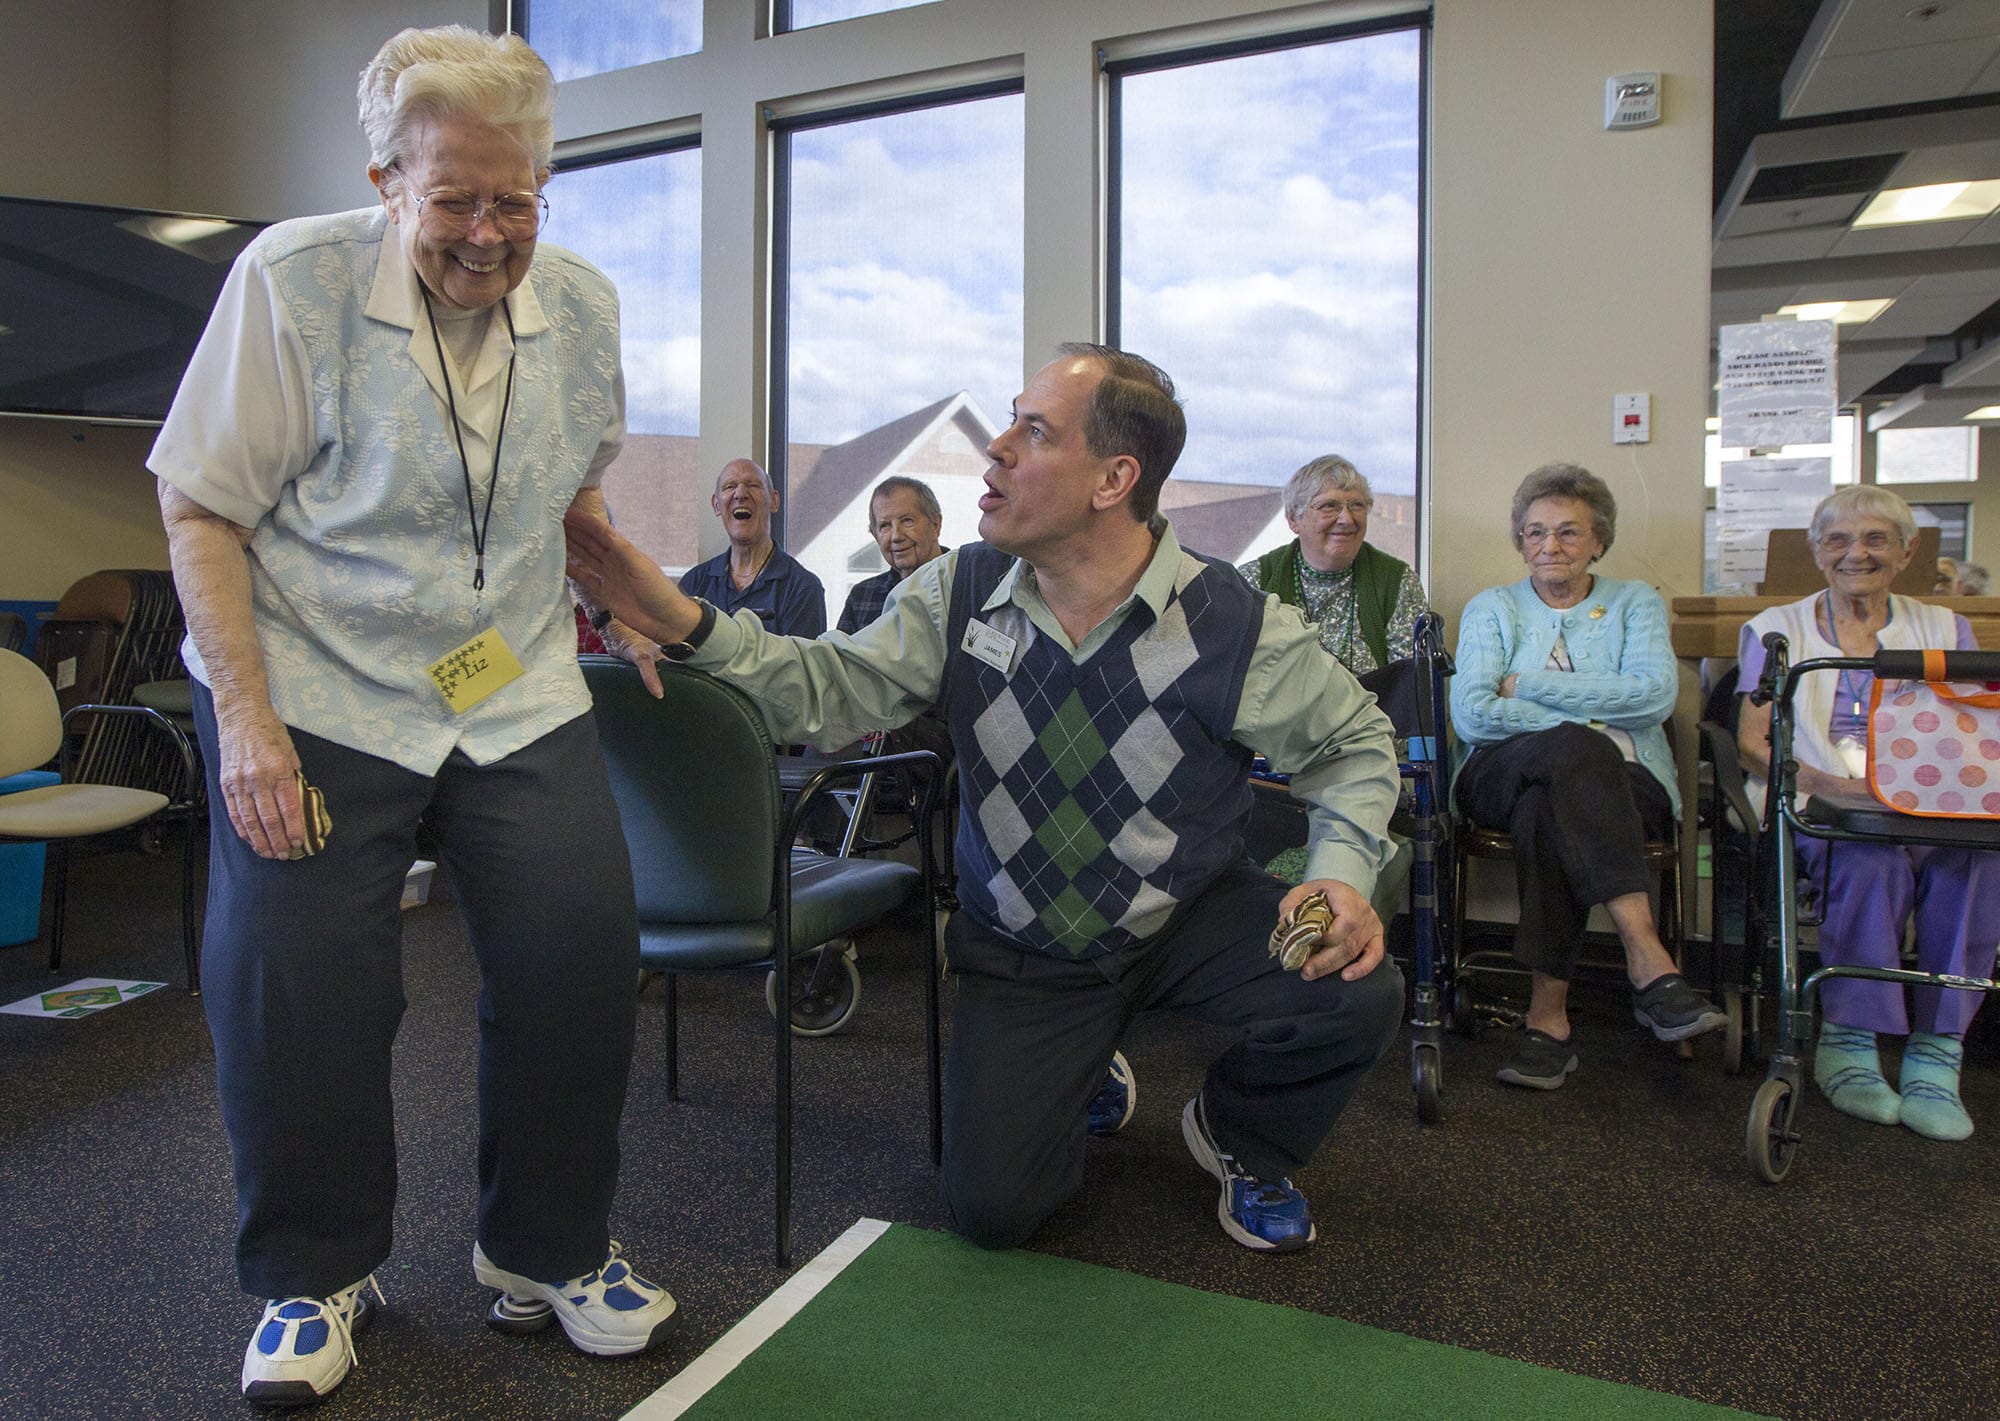 James Winther helps Liz Boss take aim as he leads teams of seniors in a game of bean bag baseball at Glenwood Place Senior Living in Vancouver earlier this month.